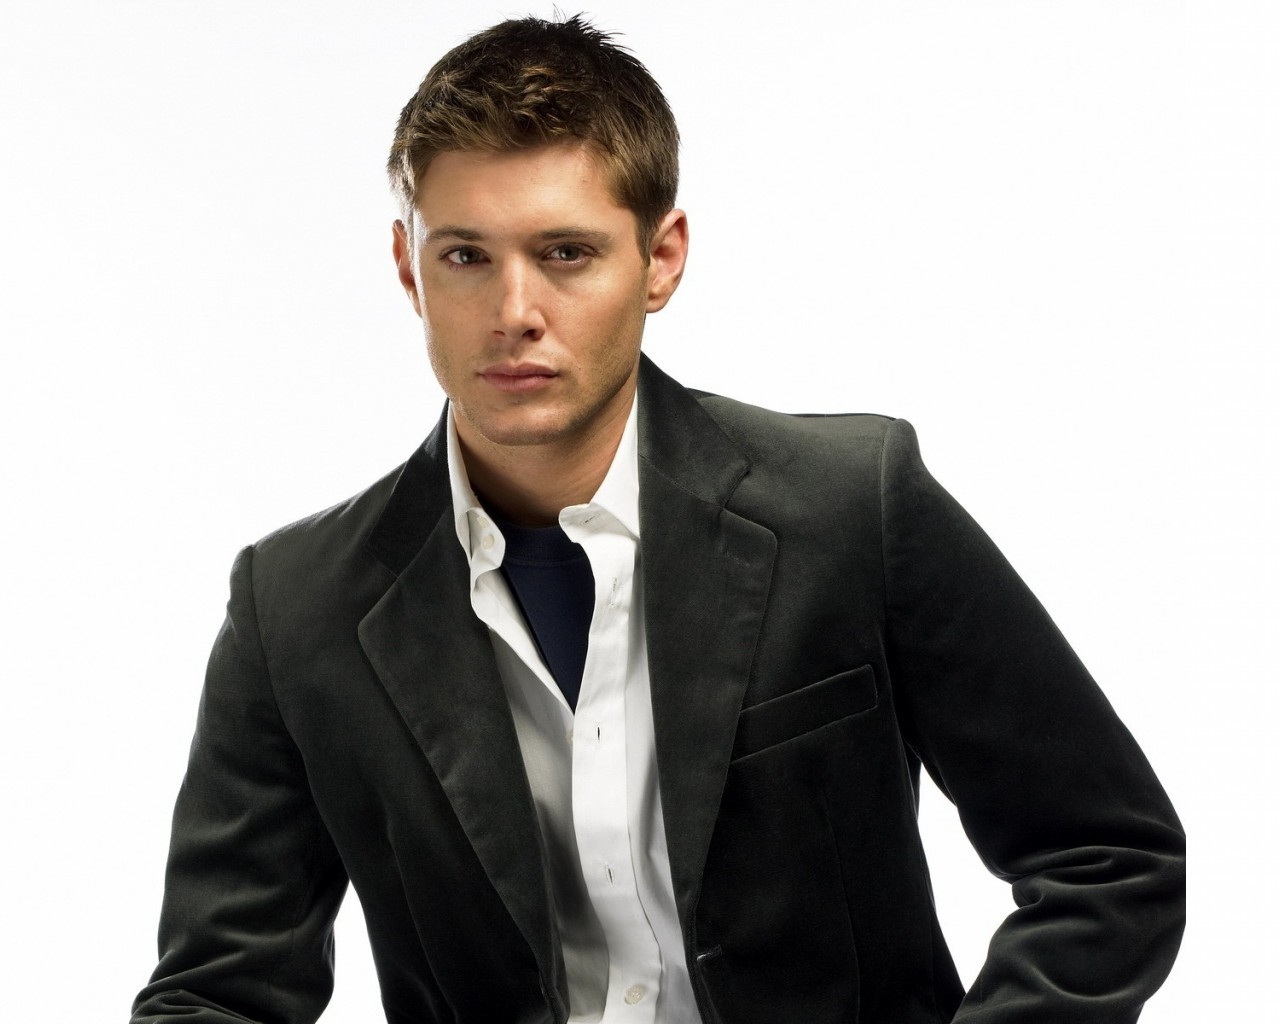 Cool Jensen Ackles for 1280 x 1024 resolution